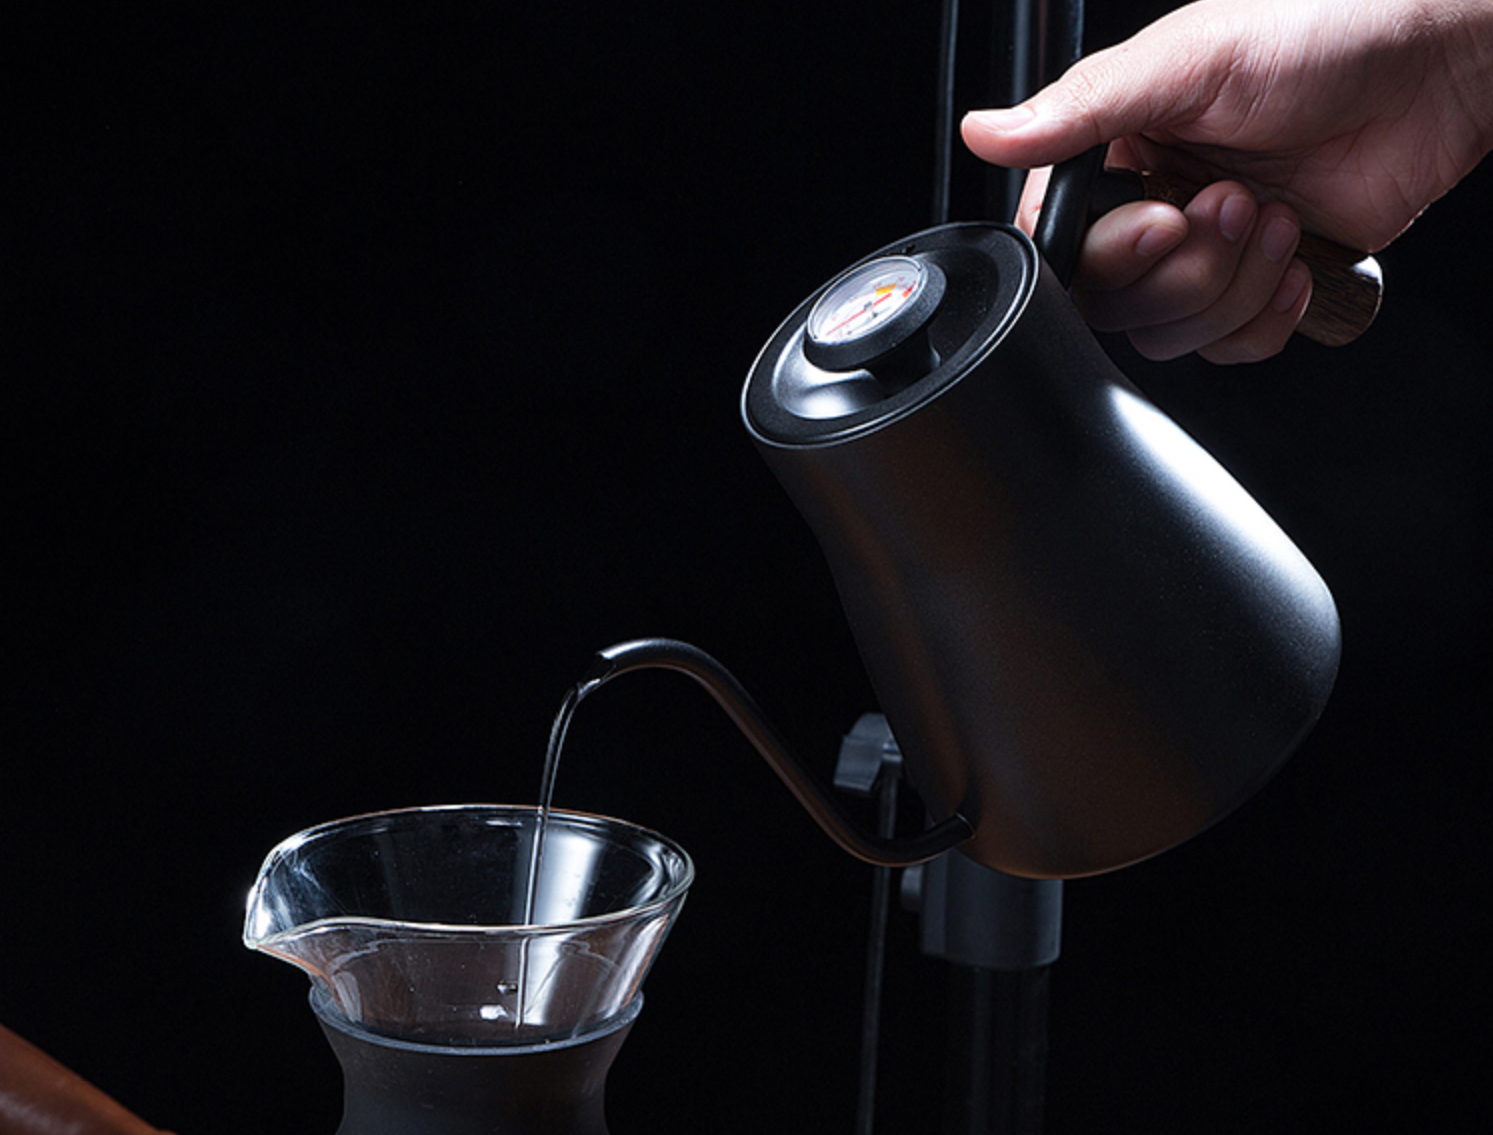 Barista Space Brewing Kettle 850ml (with thermometer)